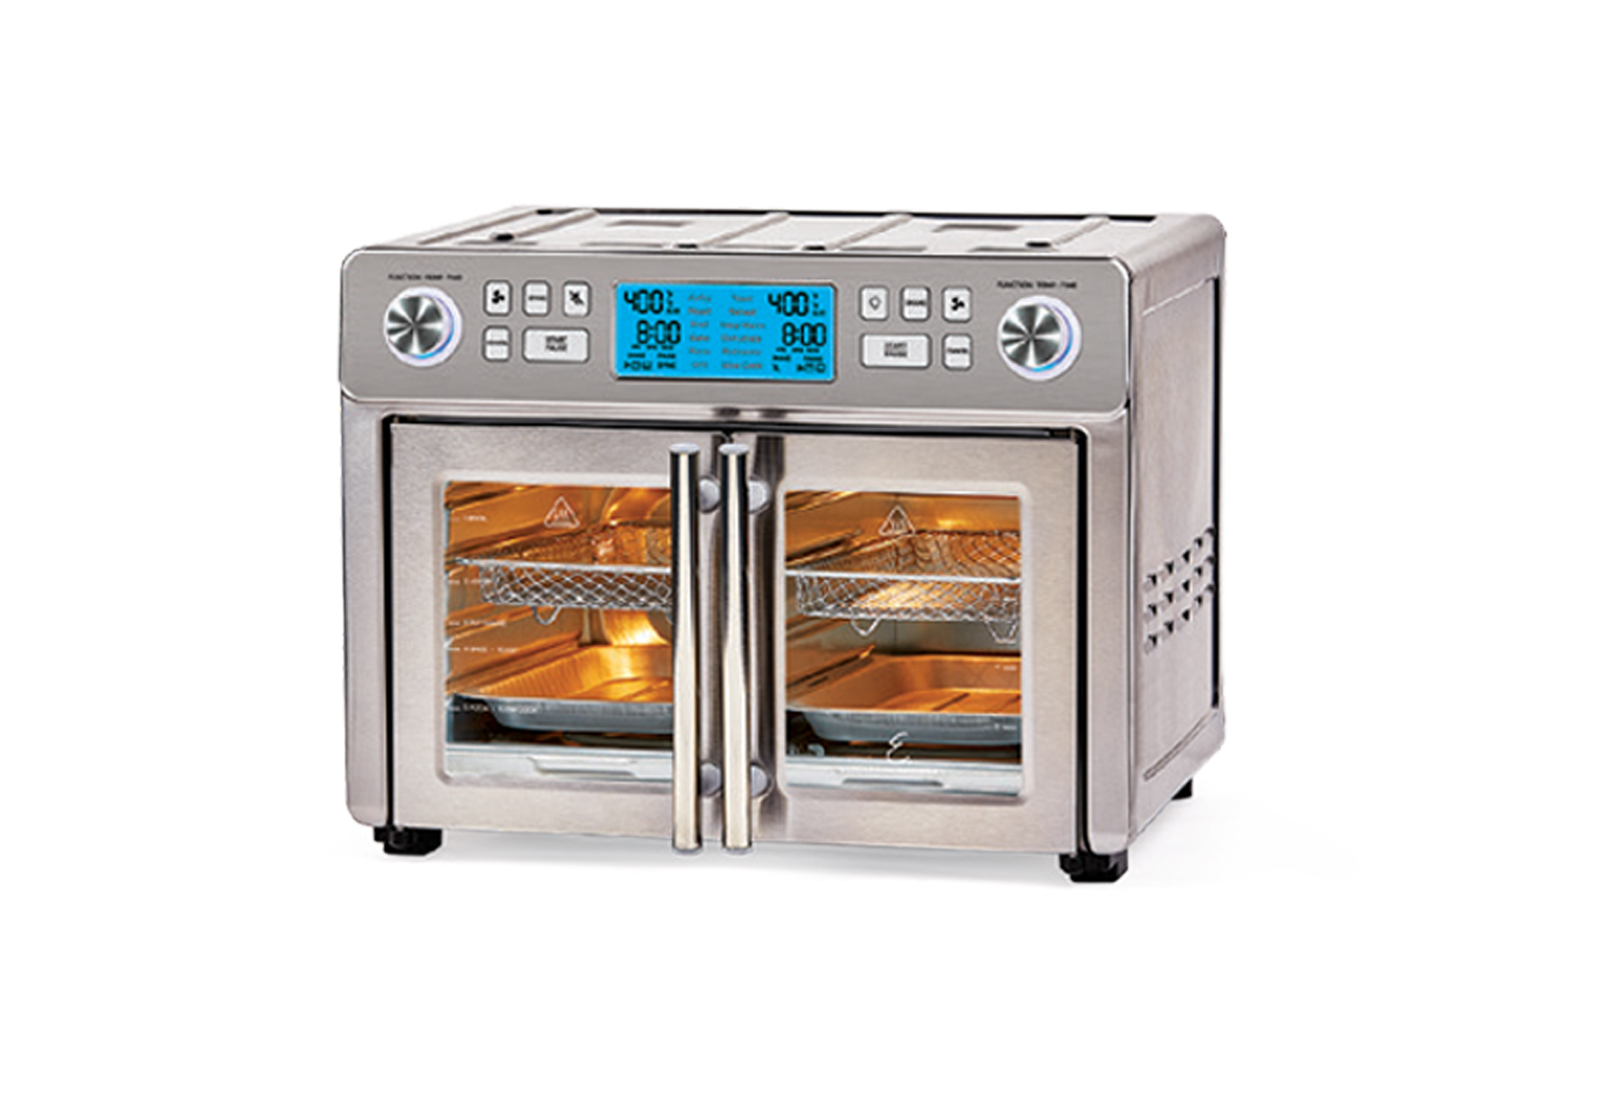 Emeril Lagasse Dual-Zone AirFryer Oven